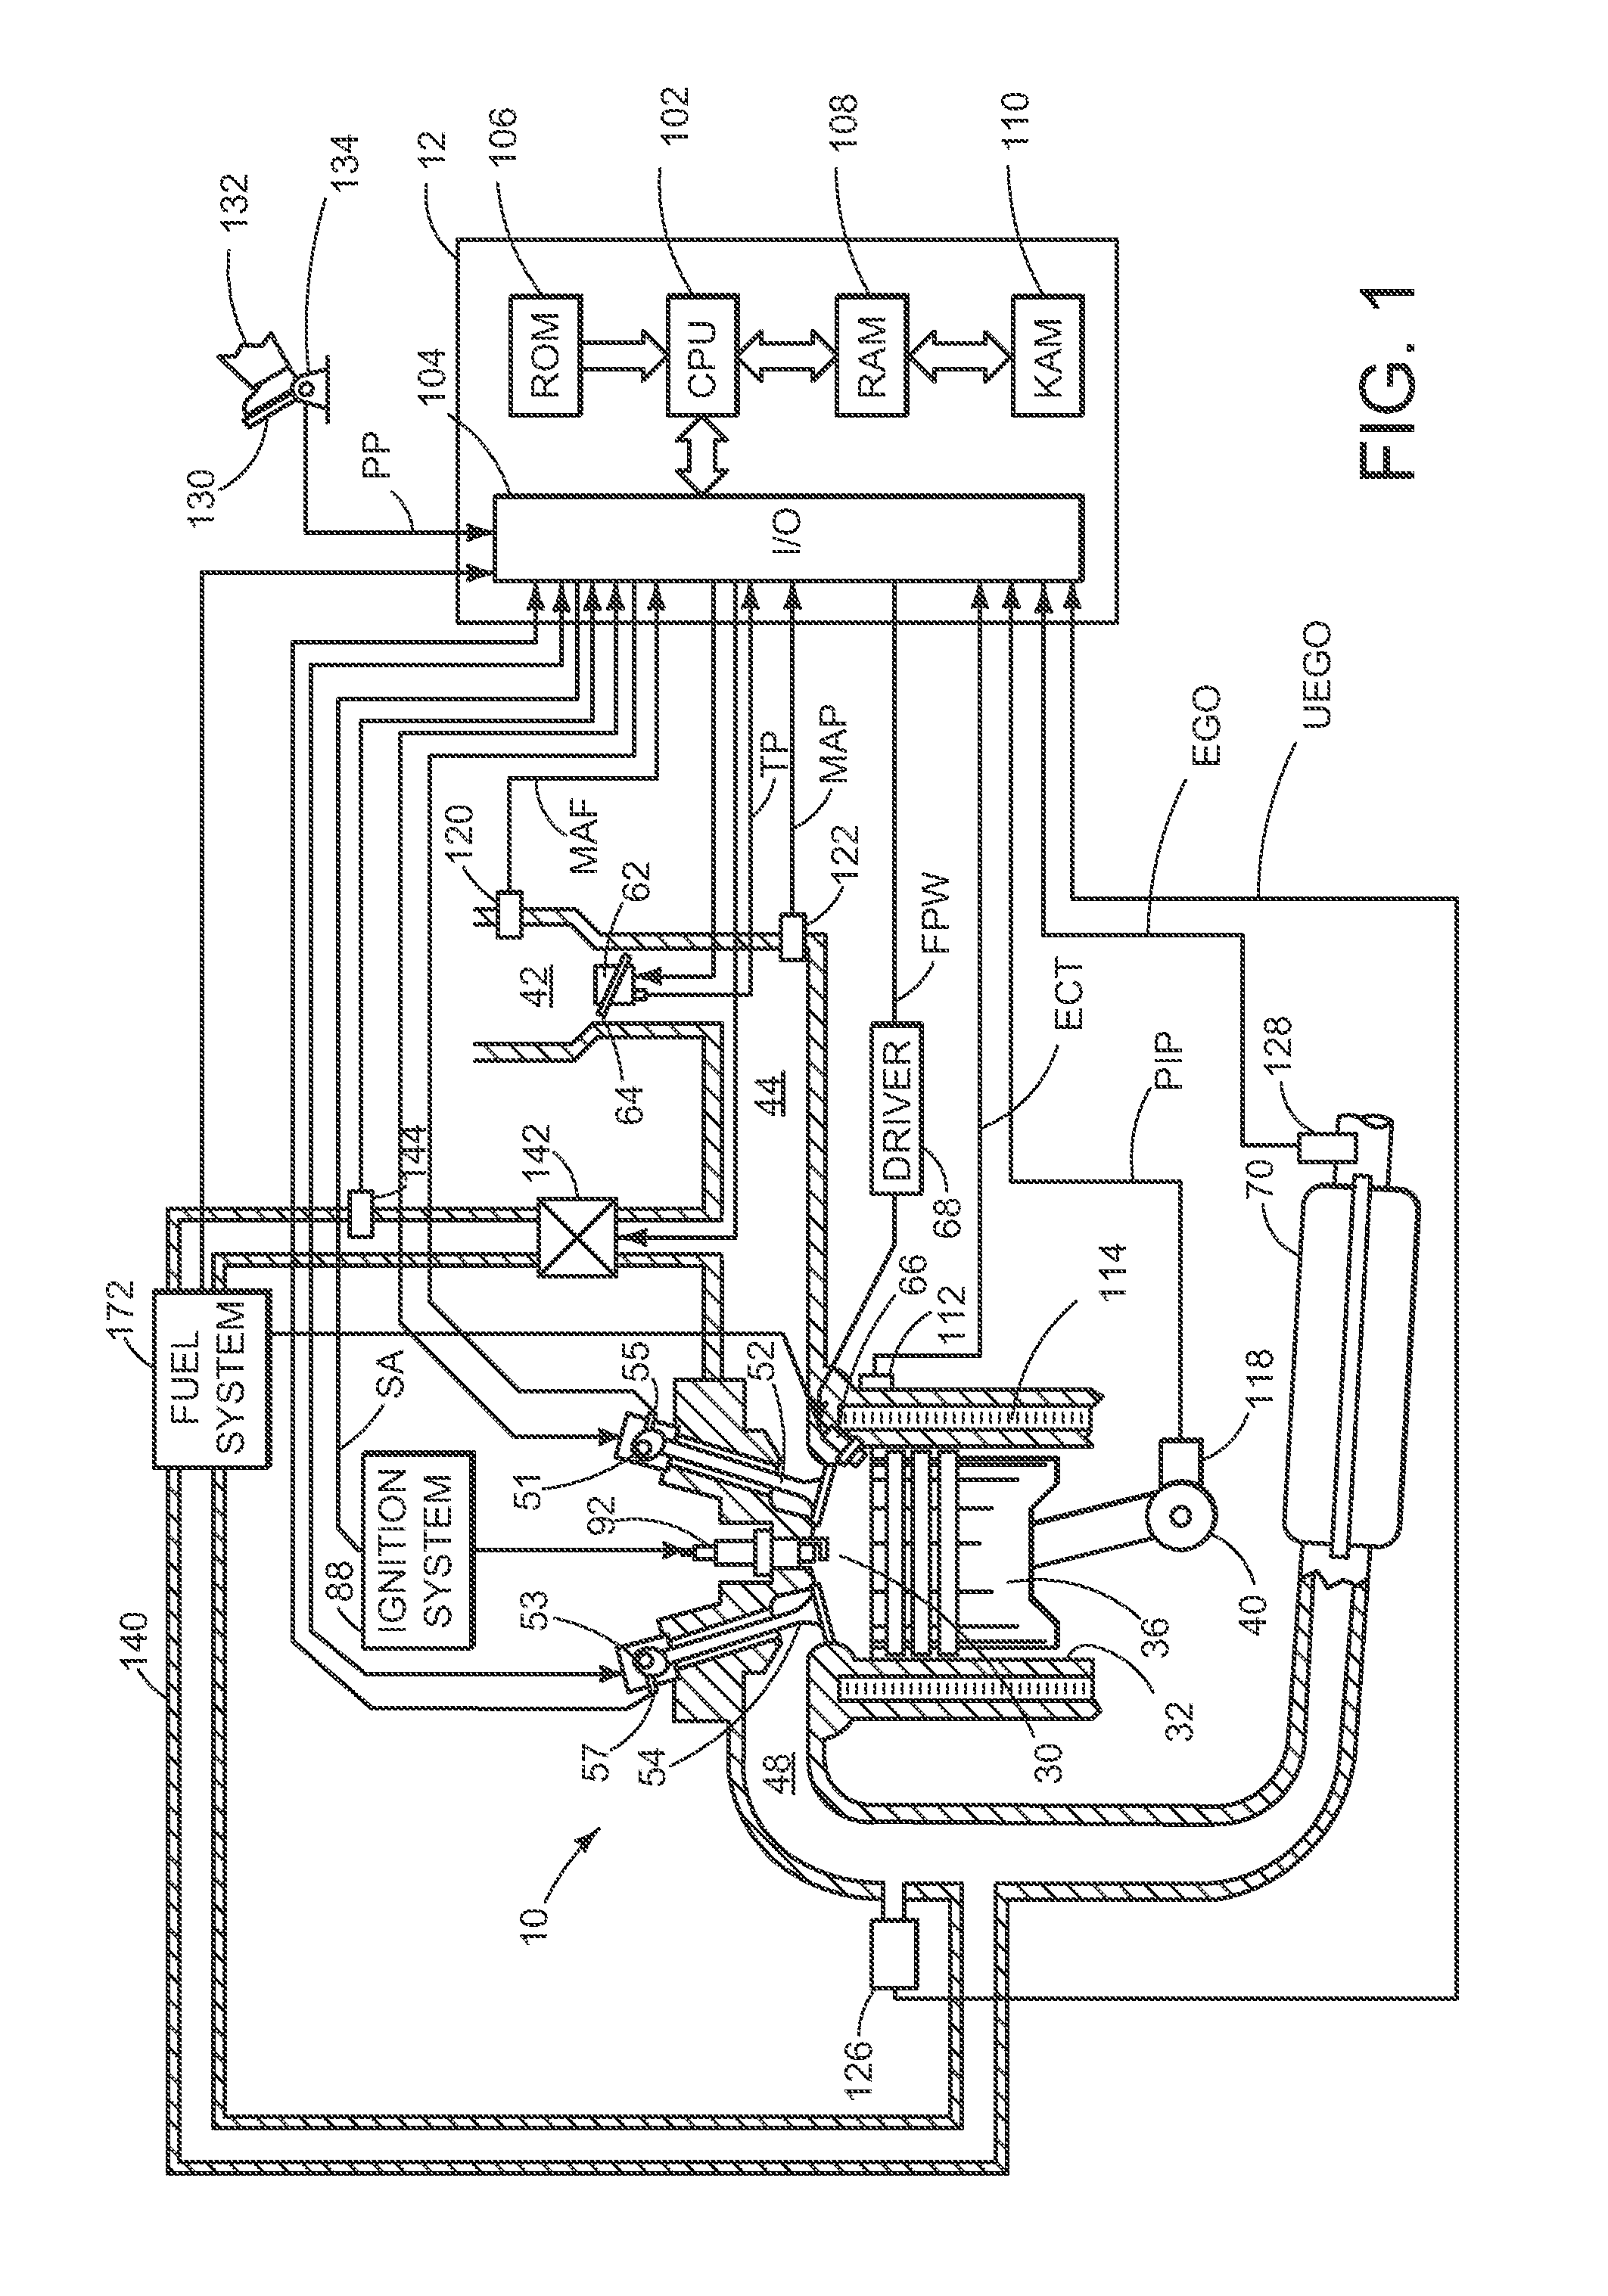 Multi-cylinder internal combustion engine and method for operating a multi-cylinder internal combustion engine